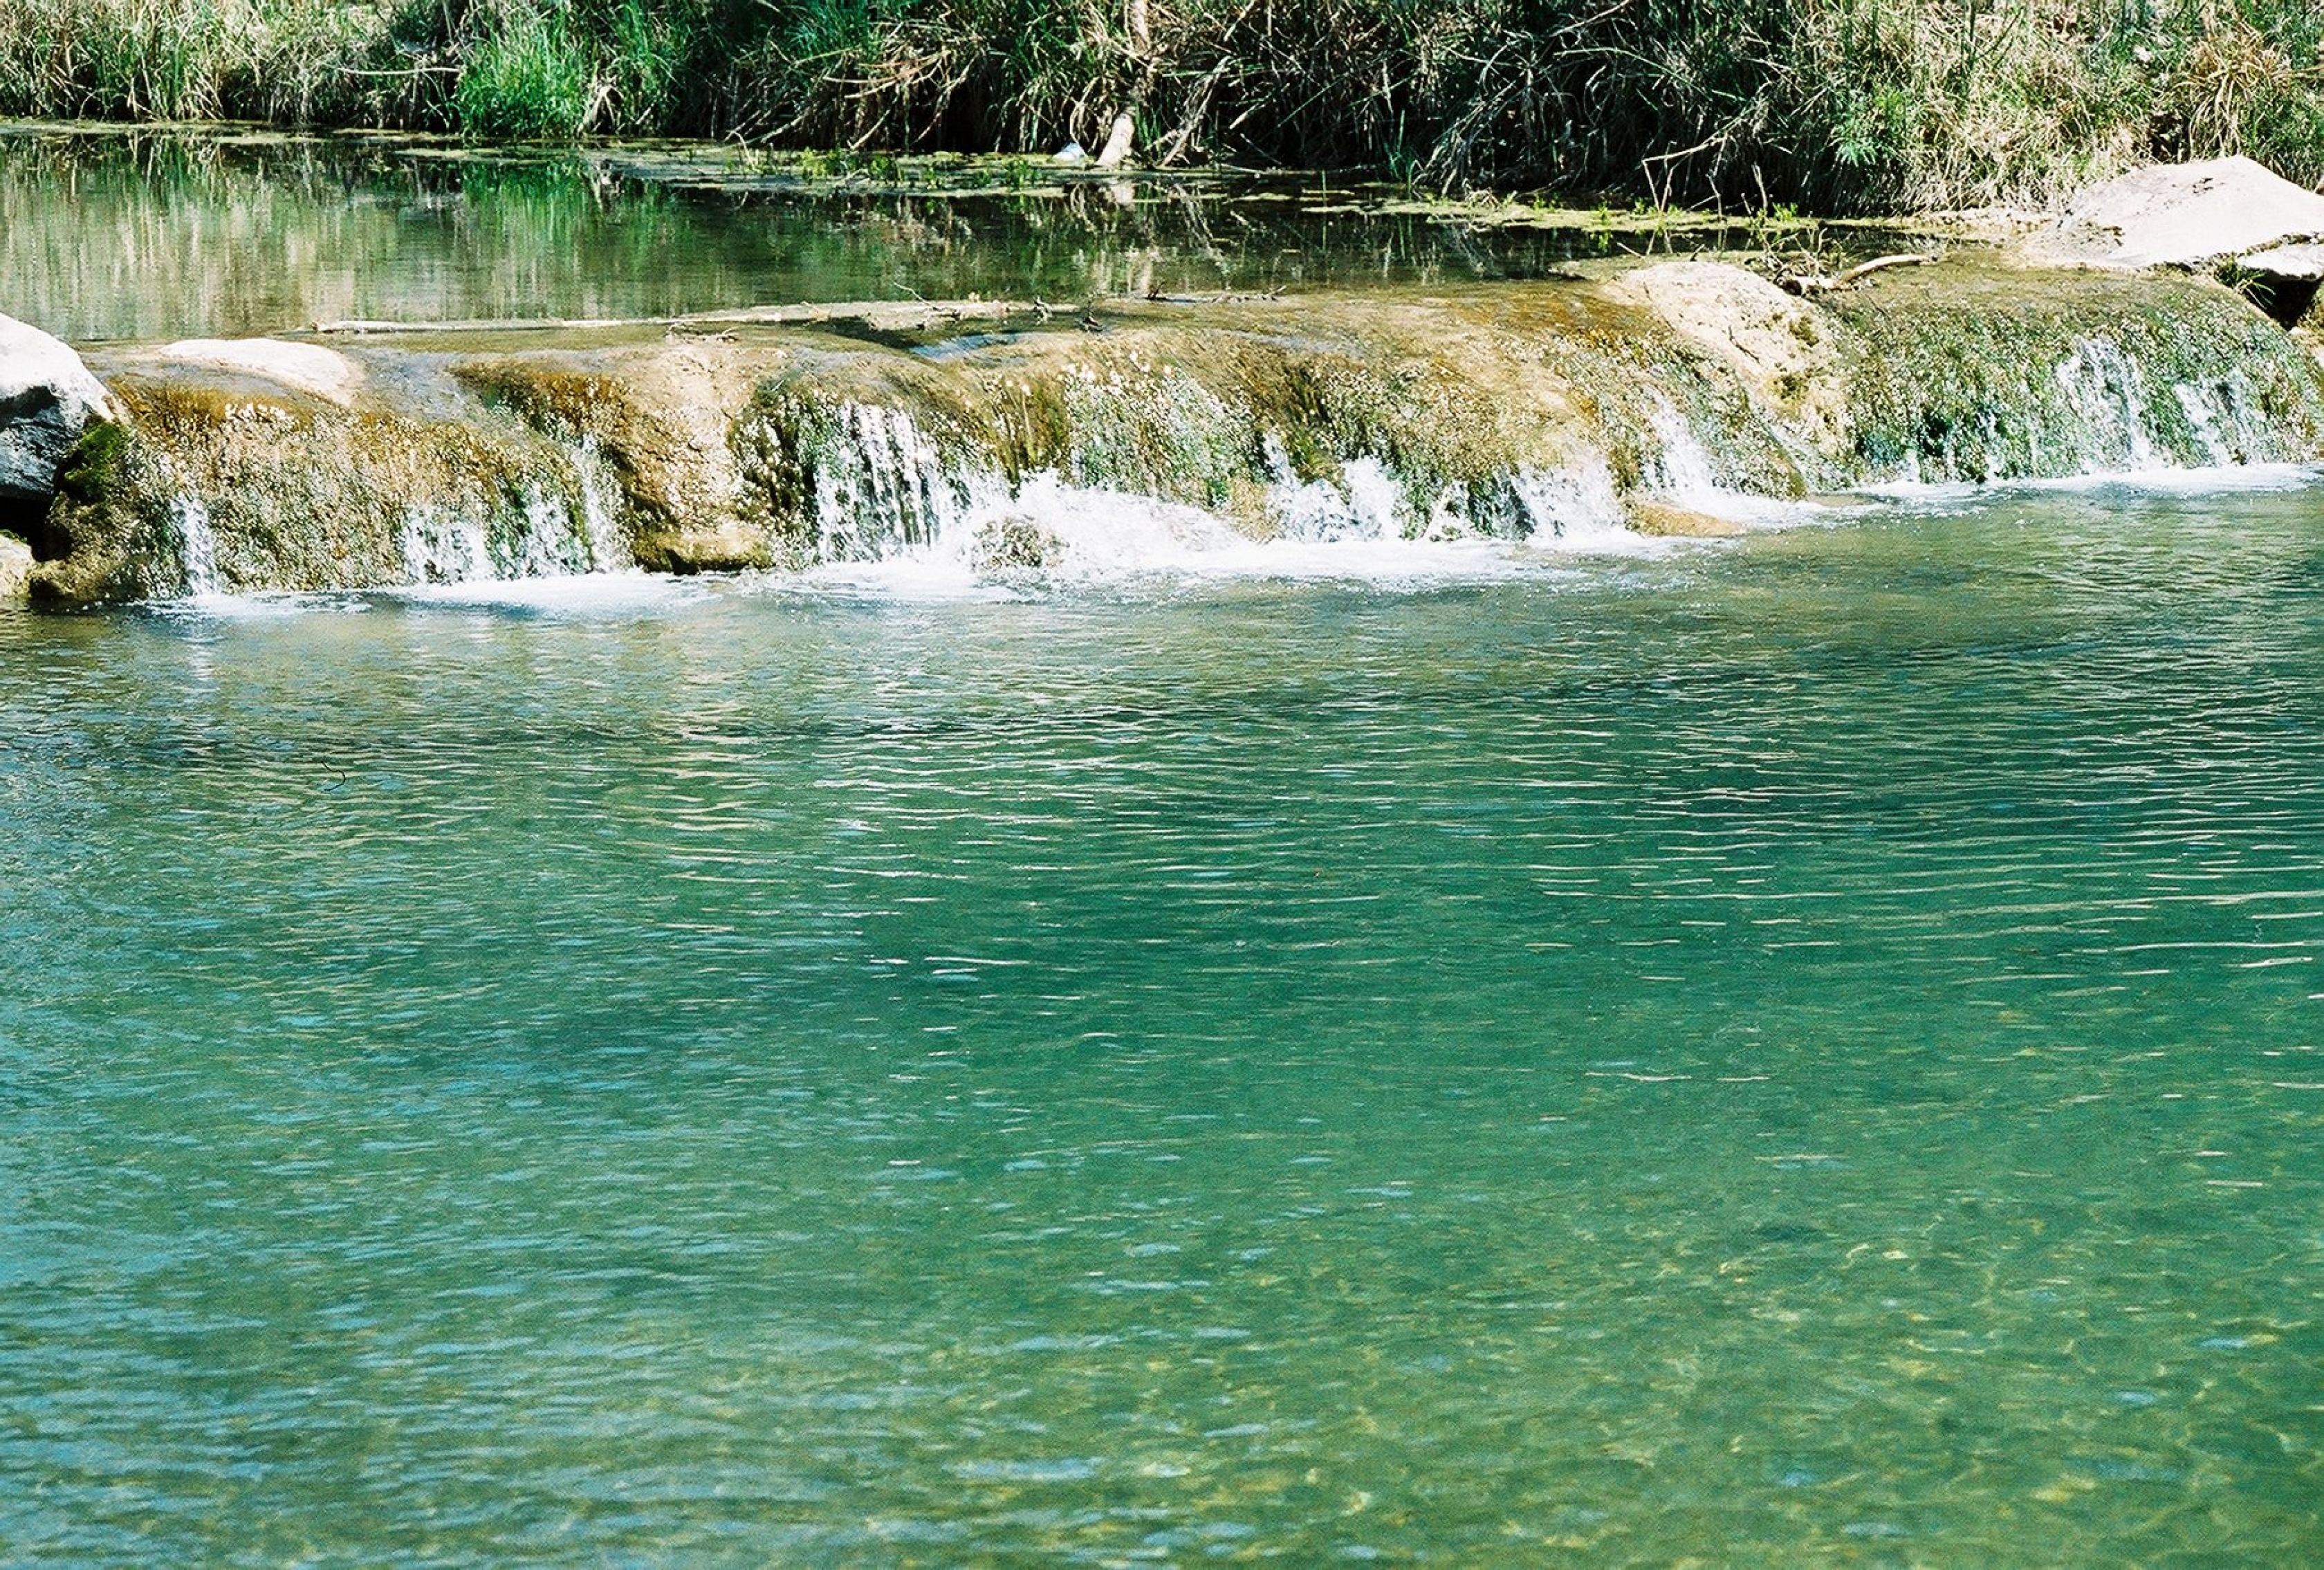 The Travertine Creek is a great swimming hole in Chickasaw.